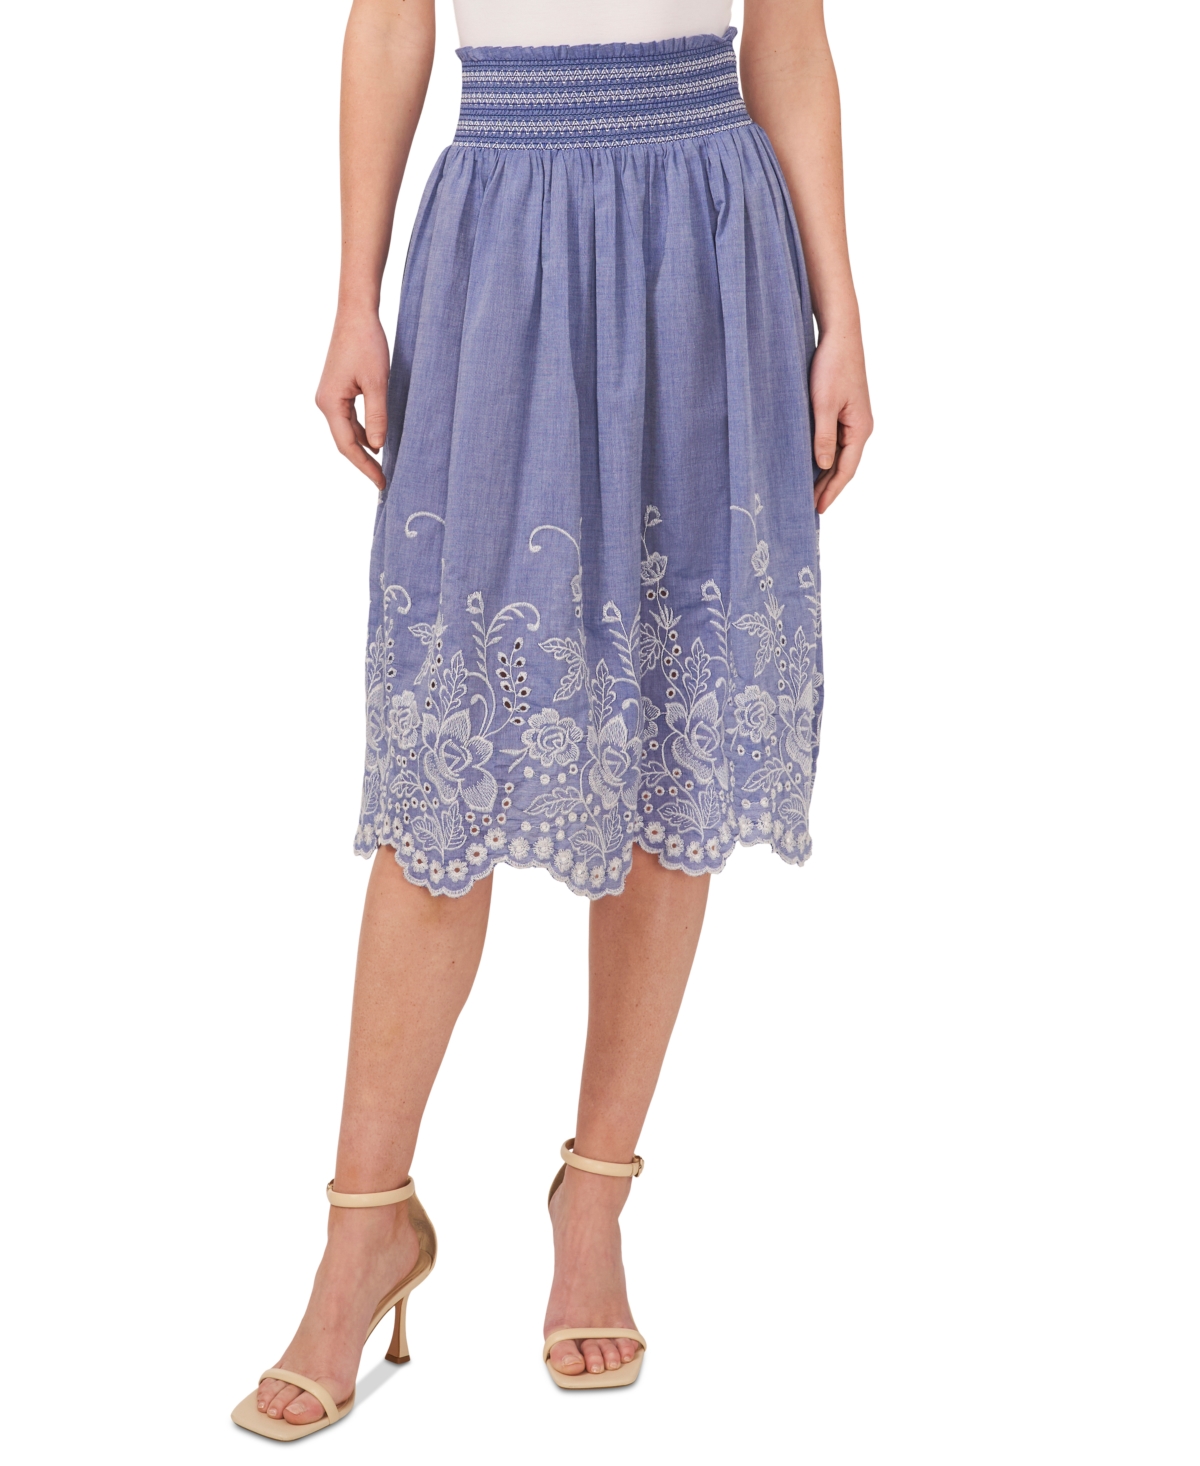 Women's Floral Embroidered Cotton Midi Skirt - Blue Air